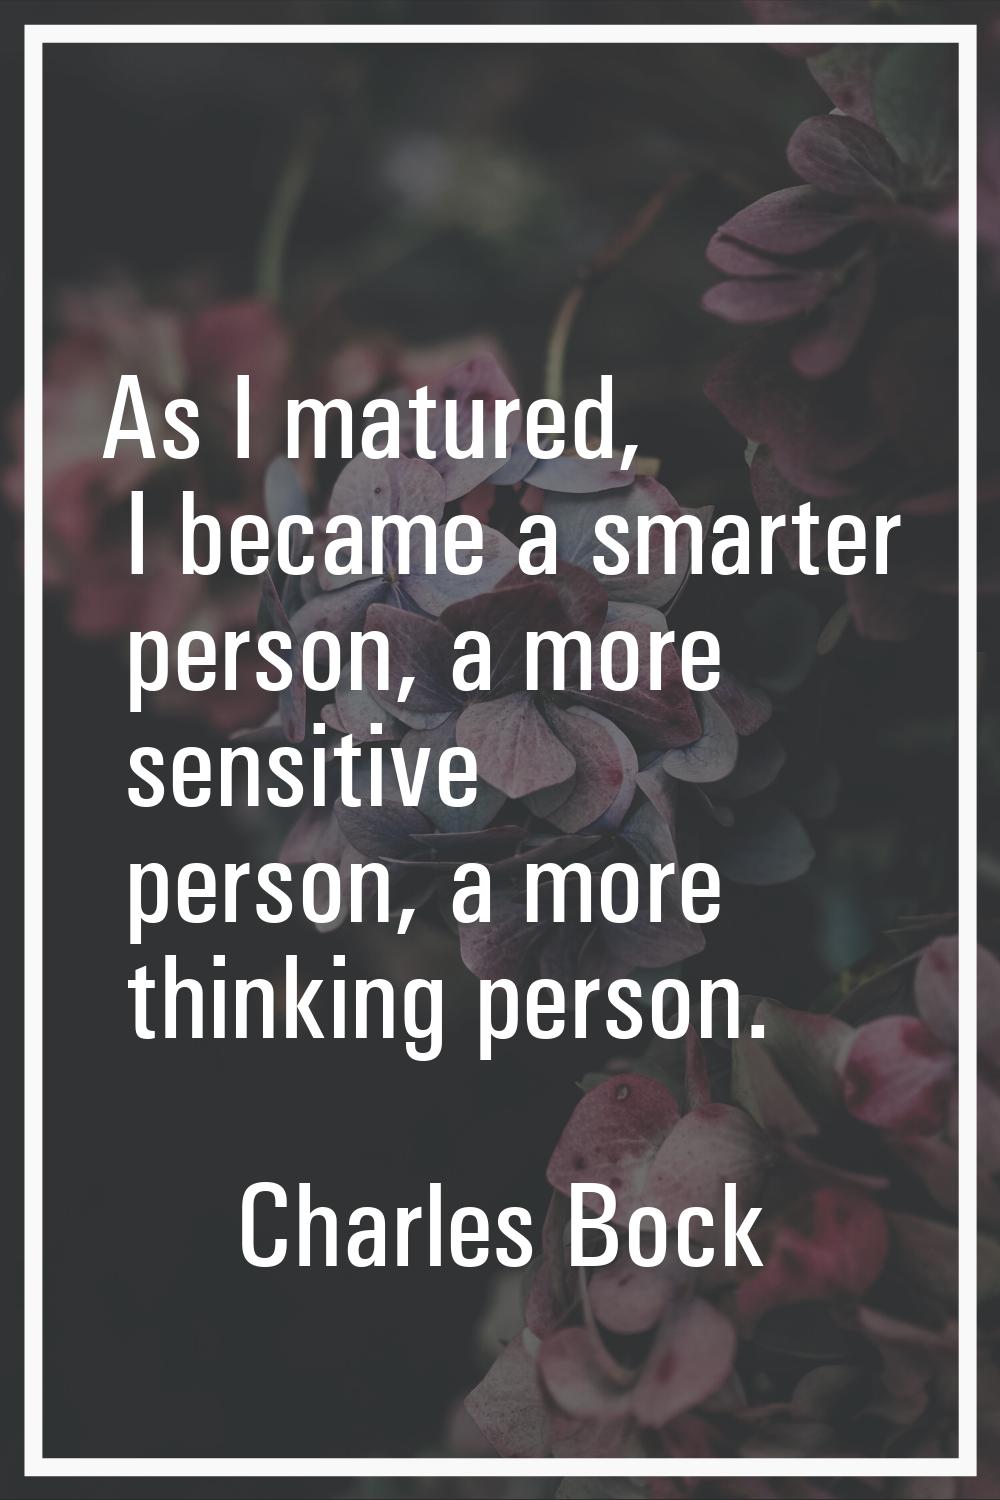 As I matured, I became a smarter person, a more sensitive person, a more thinking person.